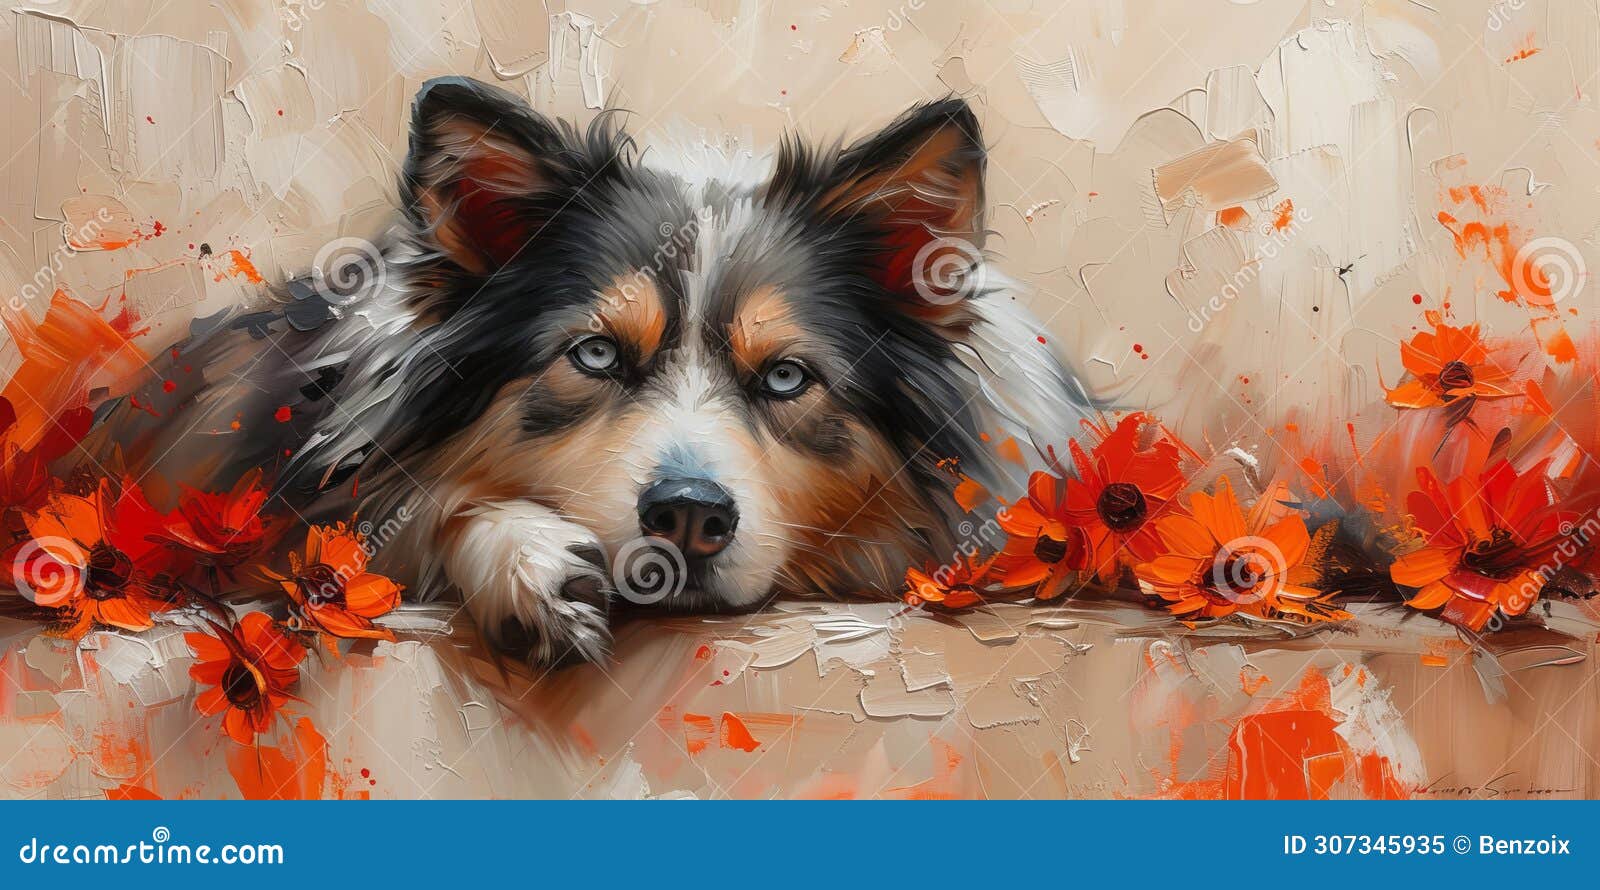 Charming watercolor illustration captures cute dog in a bright and colorful style AI generated